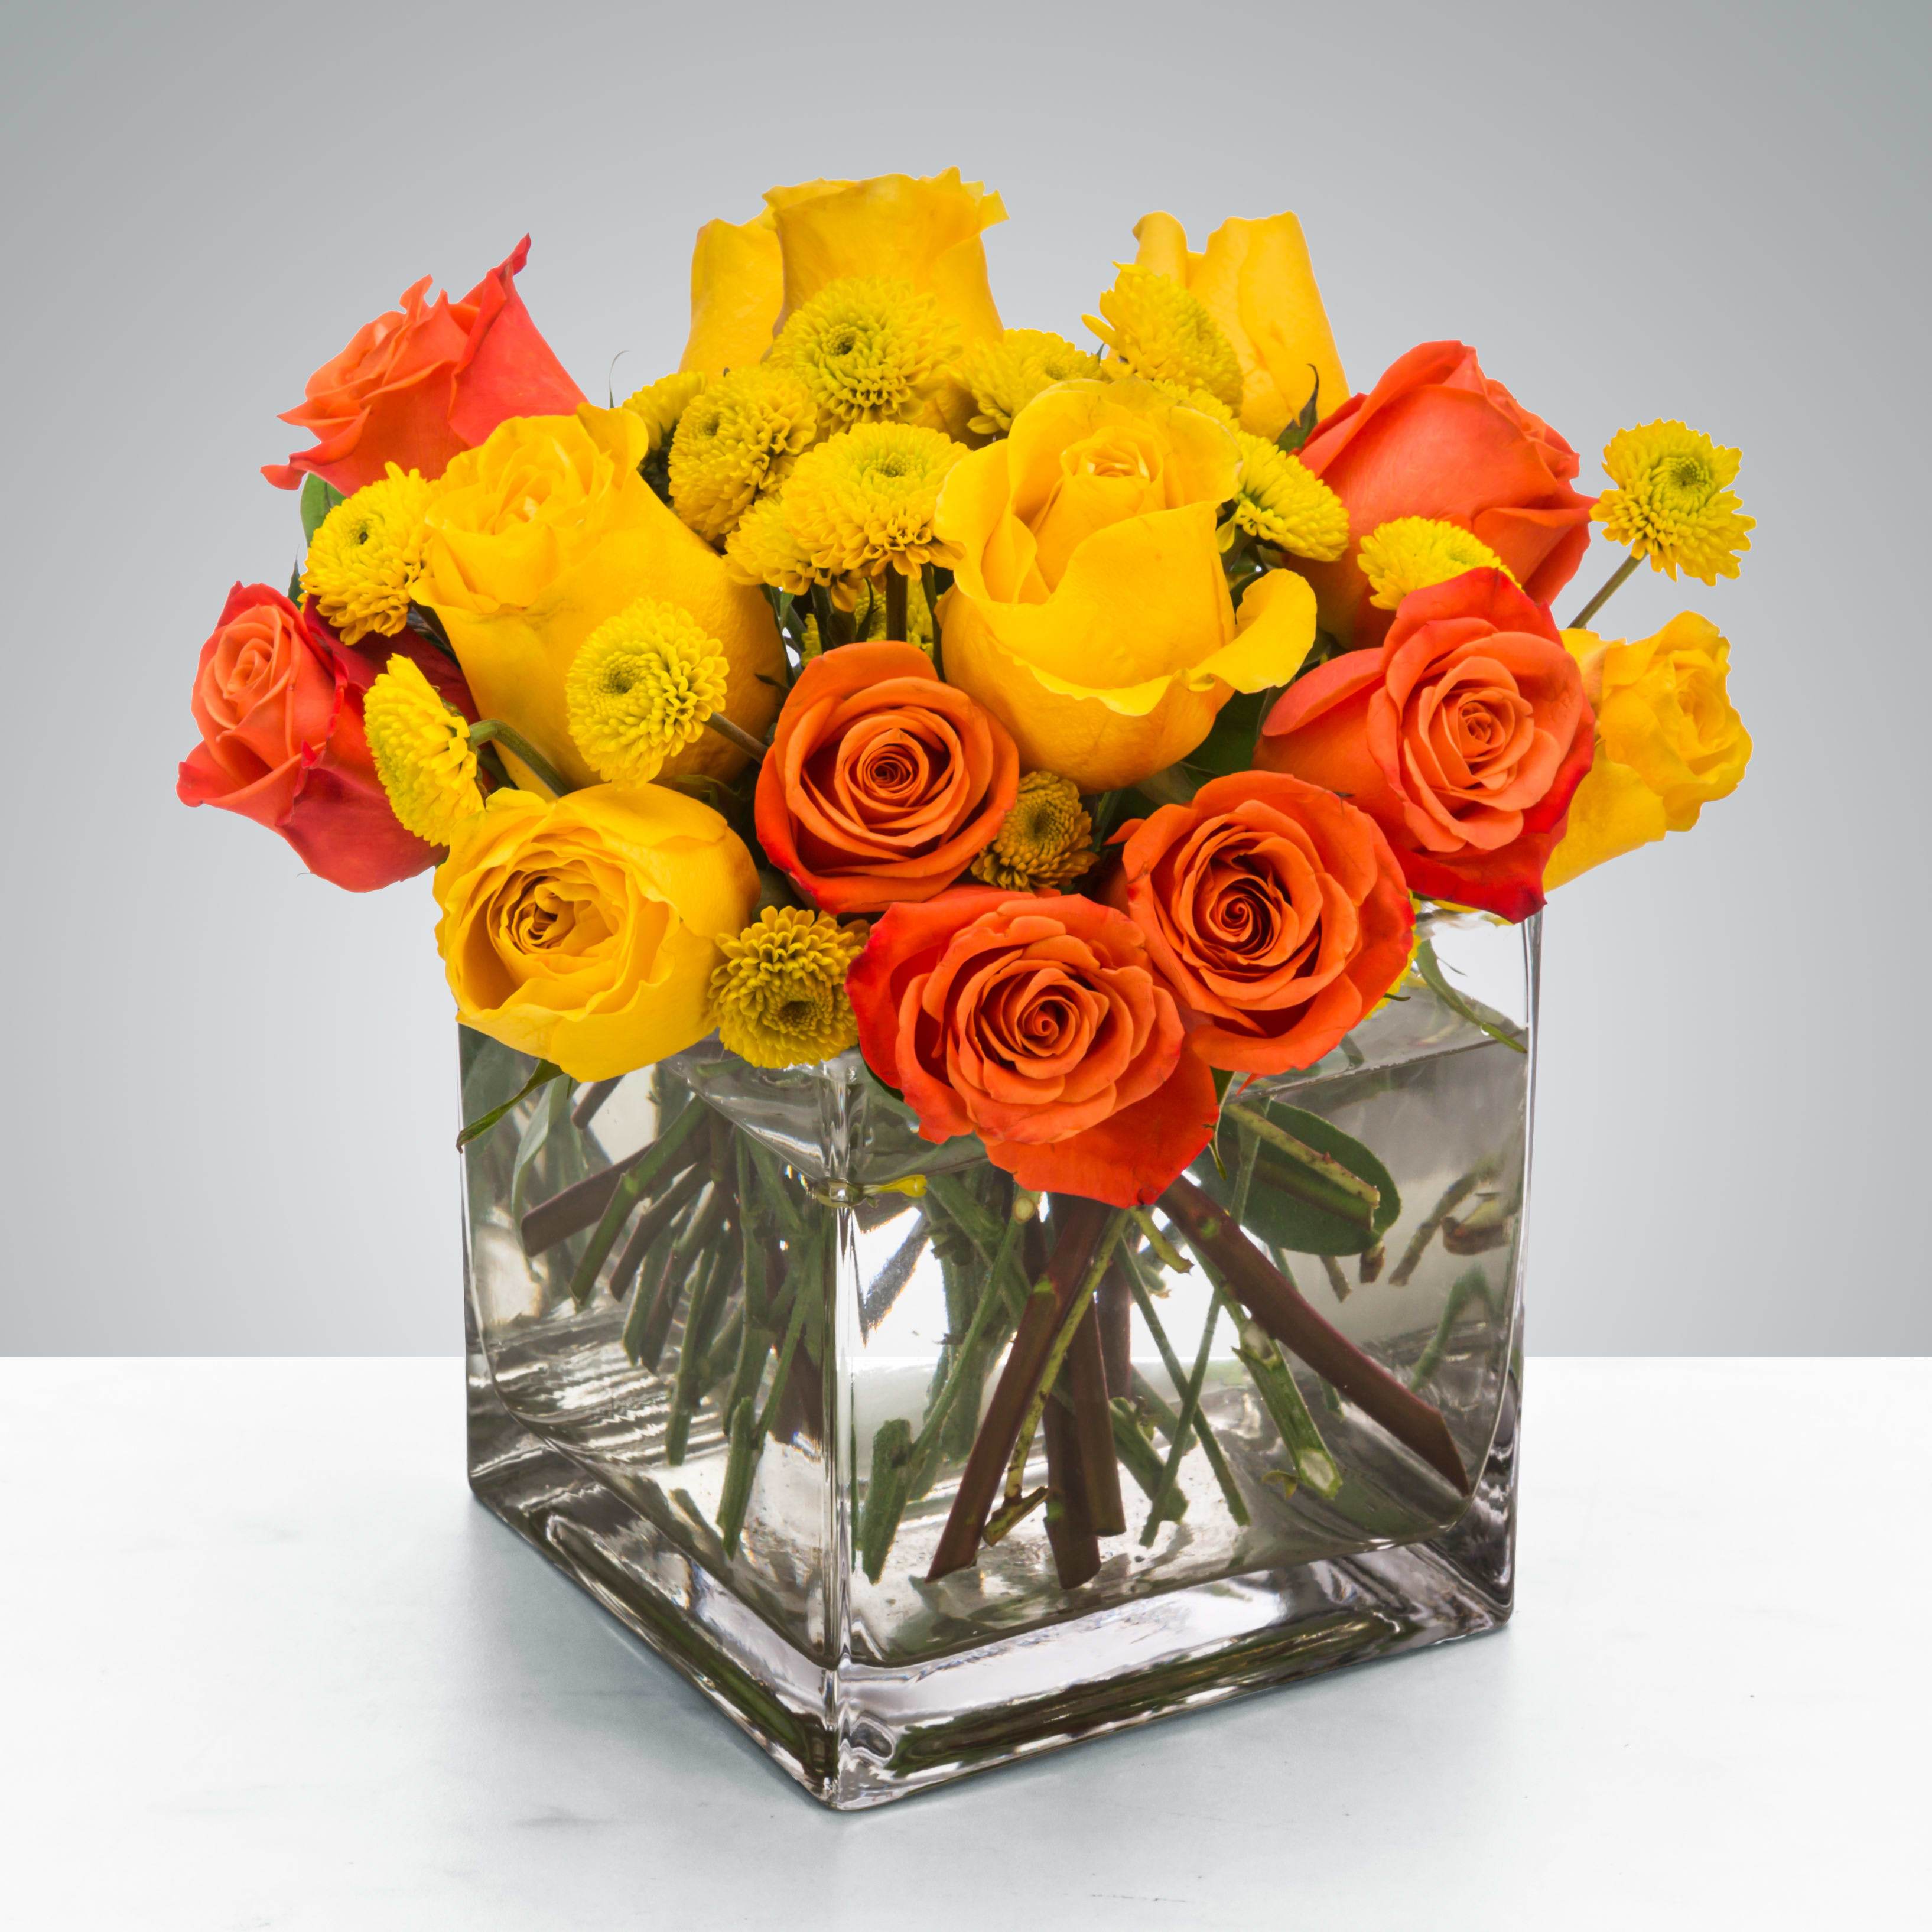 Cheer Up Buttercup  - Yellow and orange roses come together for a fun and fresh arrangement. A great arrangement to send to both men and women as a gift, these flowers light up any room. Send this for admin professionals week, Cinco De Mayo, or a birthday.  Approximate Dimensions: 10&quot;D x 10&quot;H